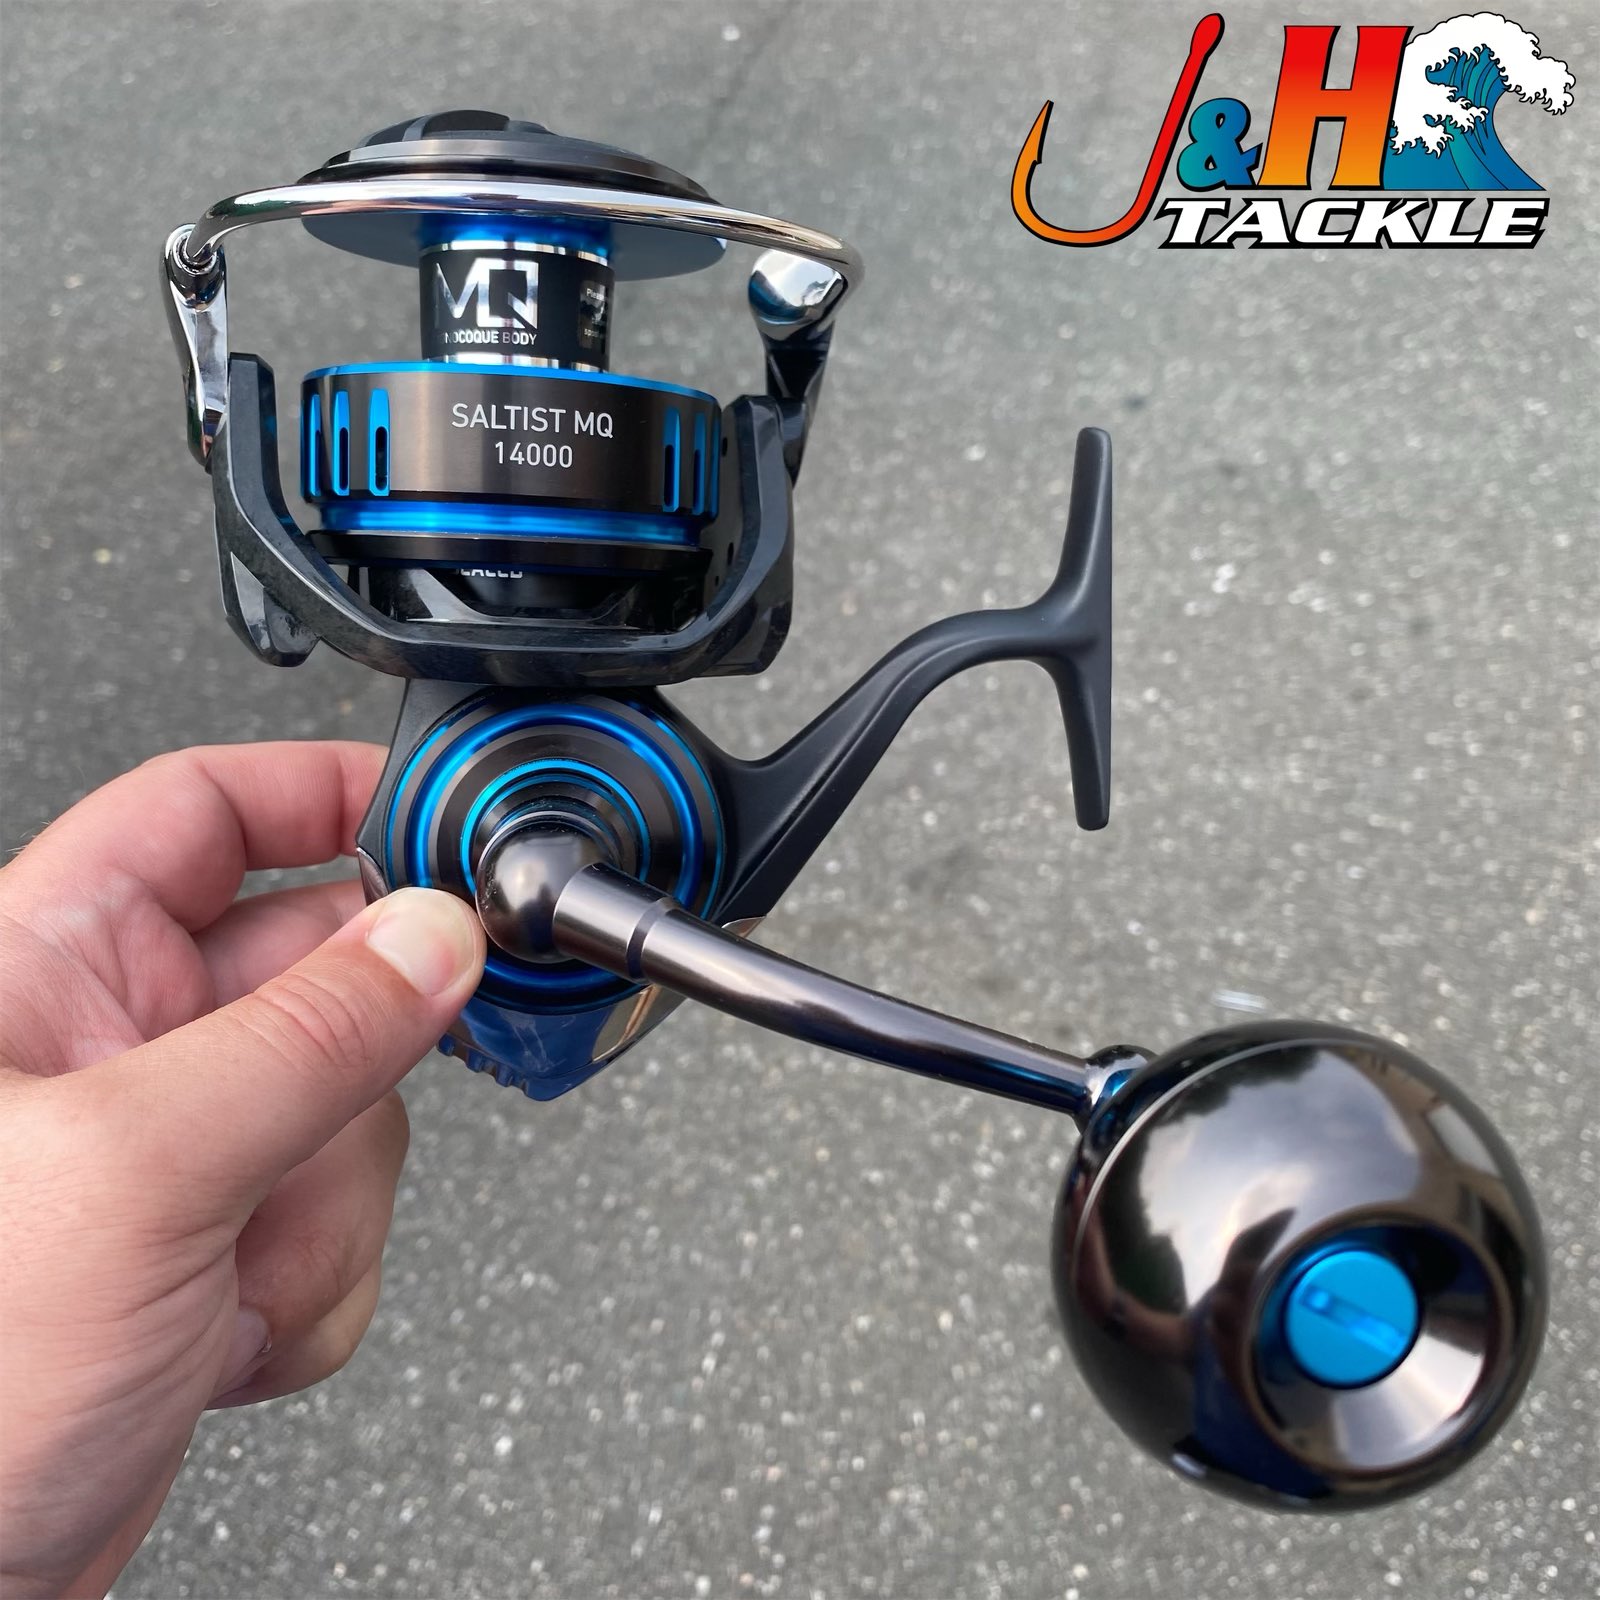 J&H Tackle on X: Posted a video review of the Daiwa Saltist MQ